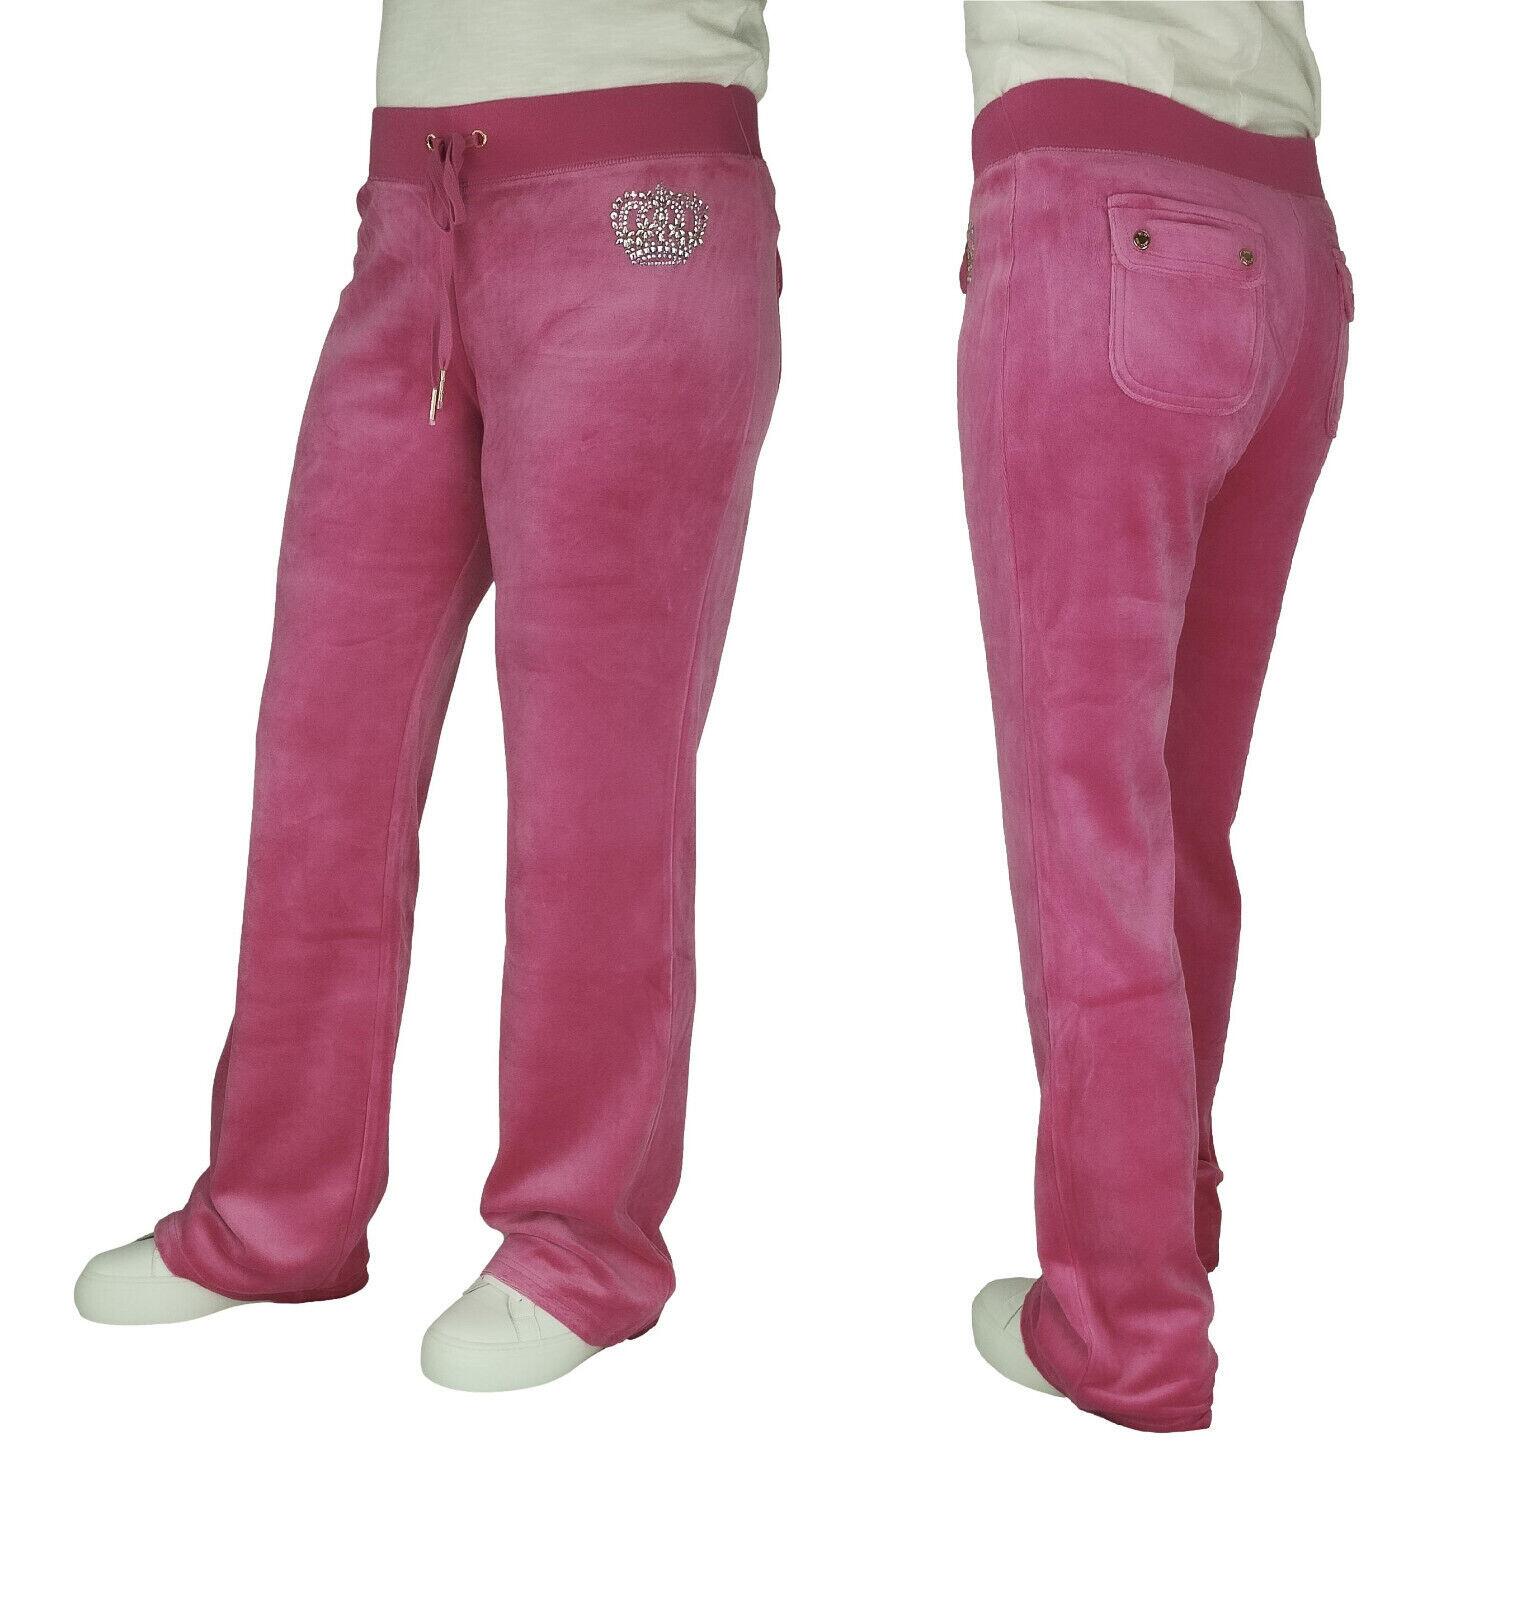 Juicy Couture Dark Pink Joggers